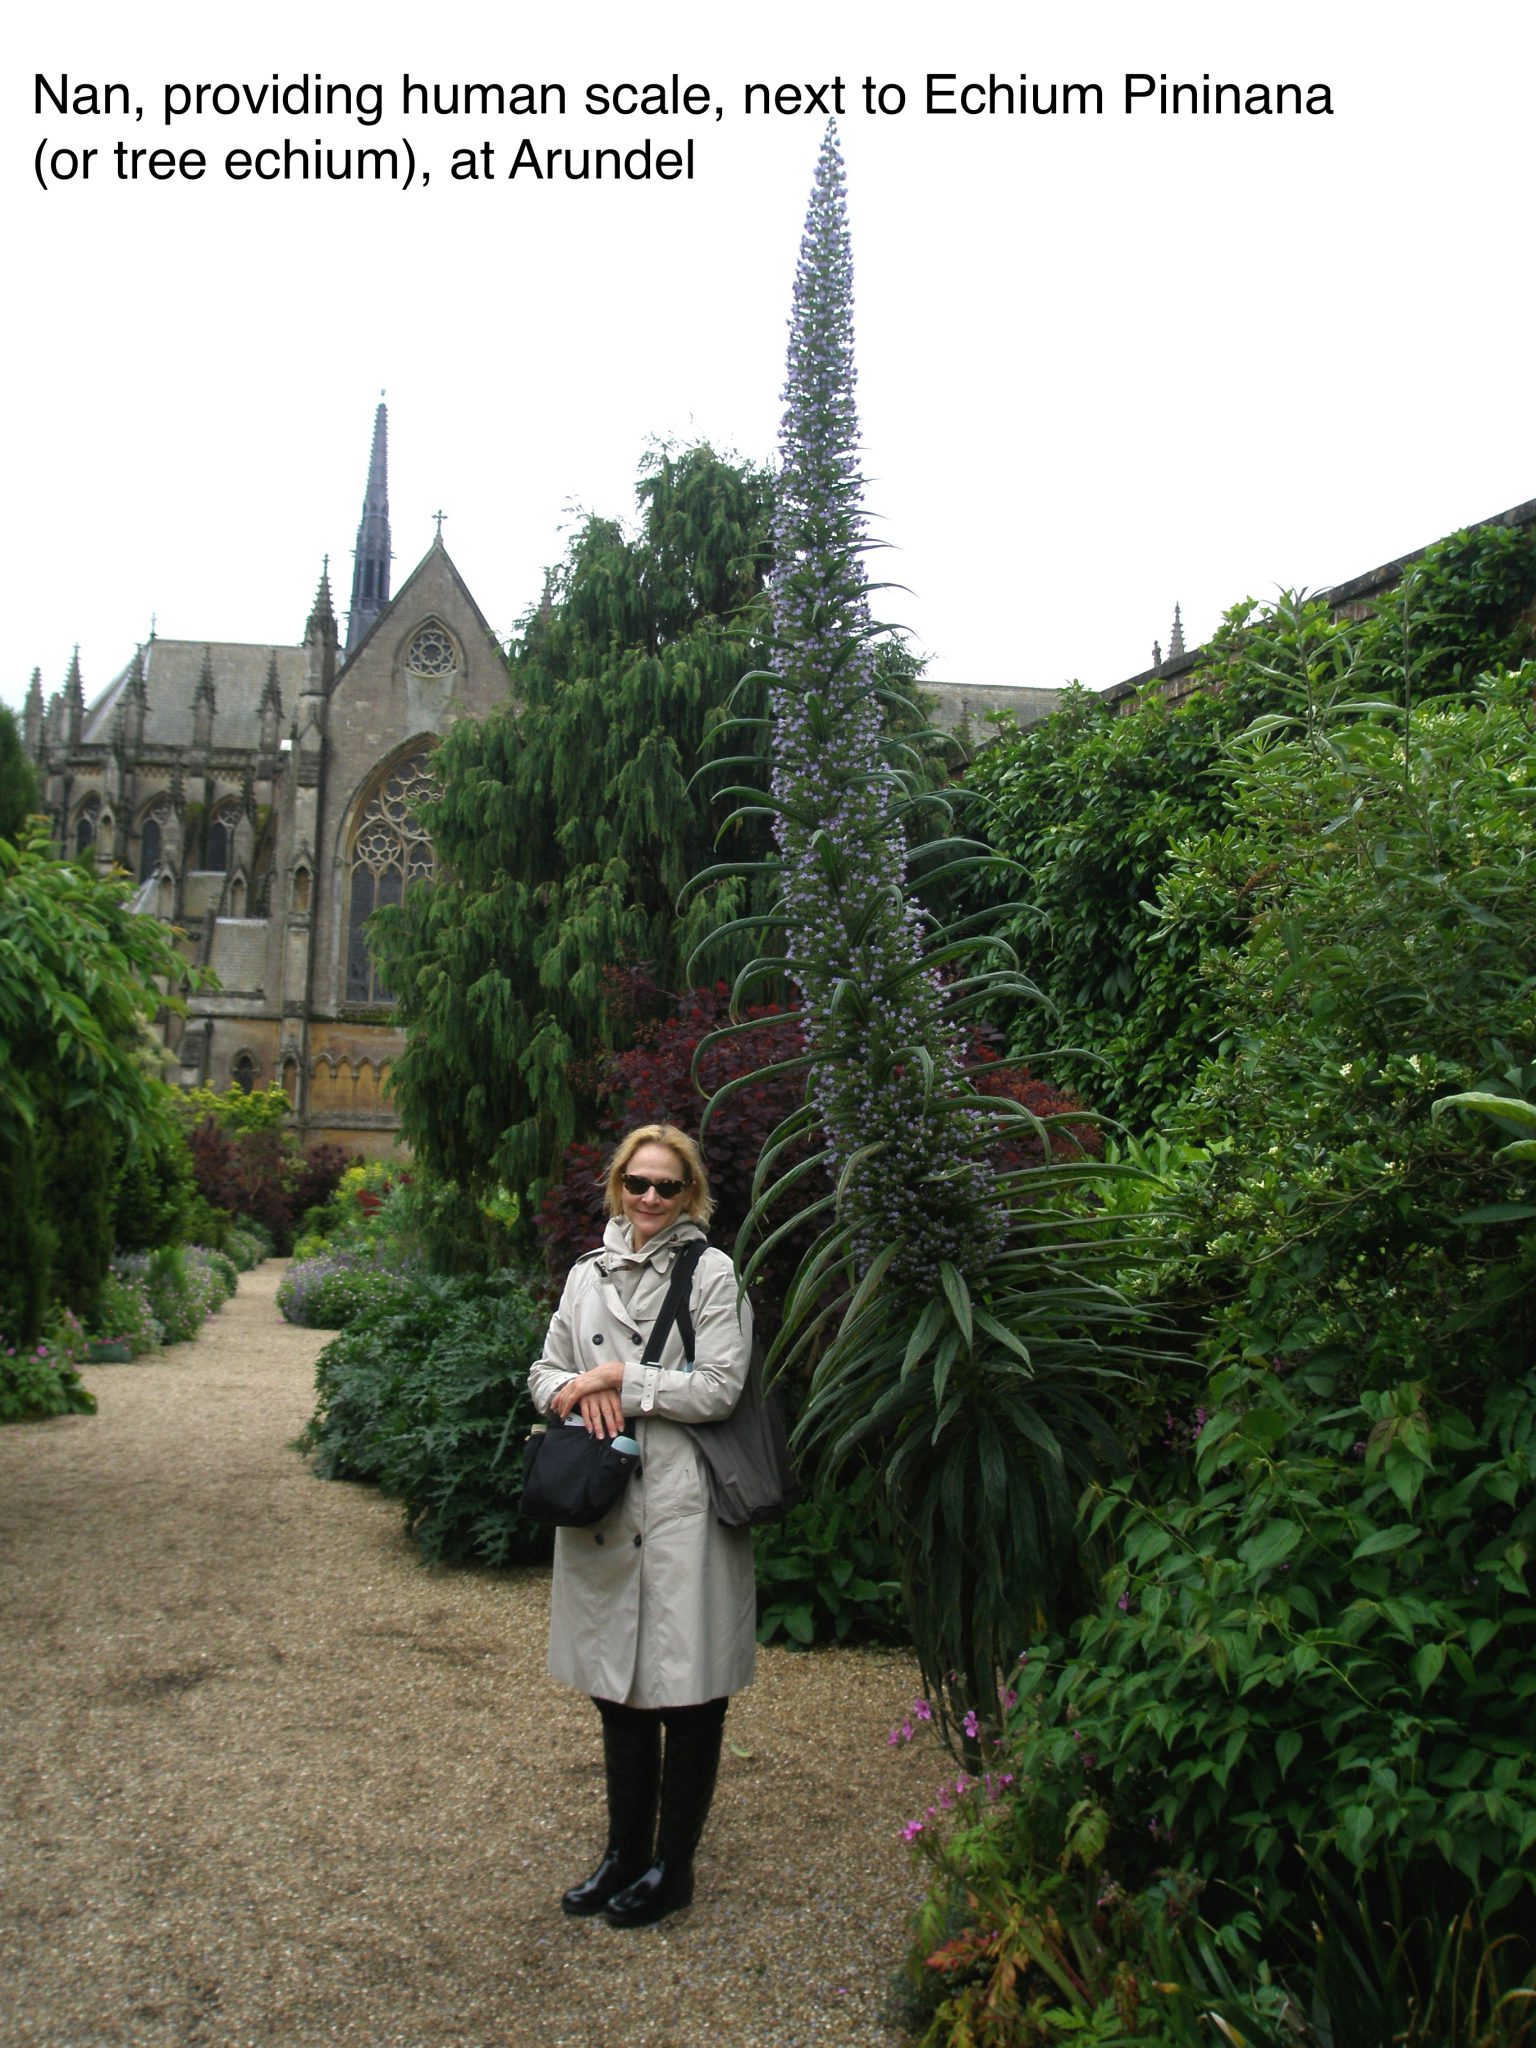 Just to drive home to you the enormity of Tree Echium, which are used for sculptural effect, here I am, to provide human scale.